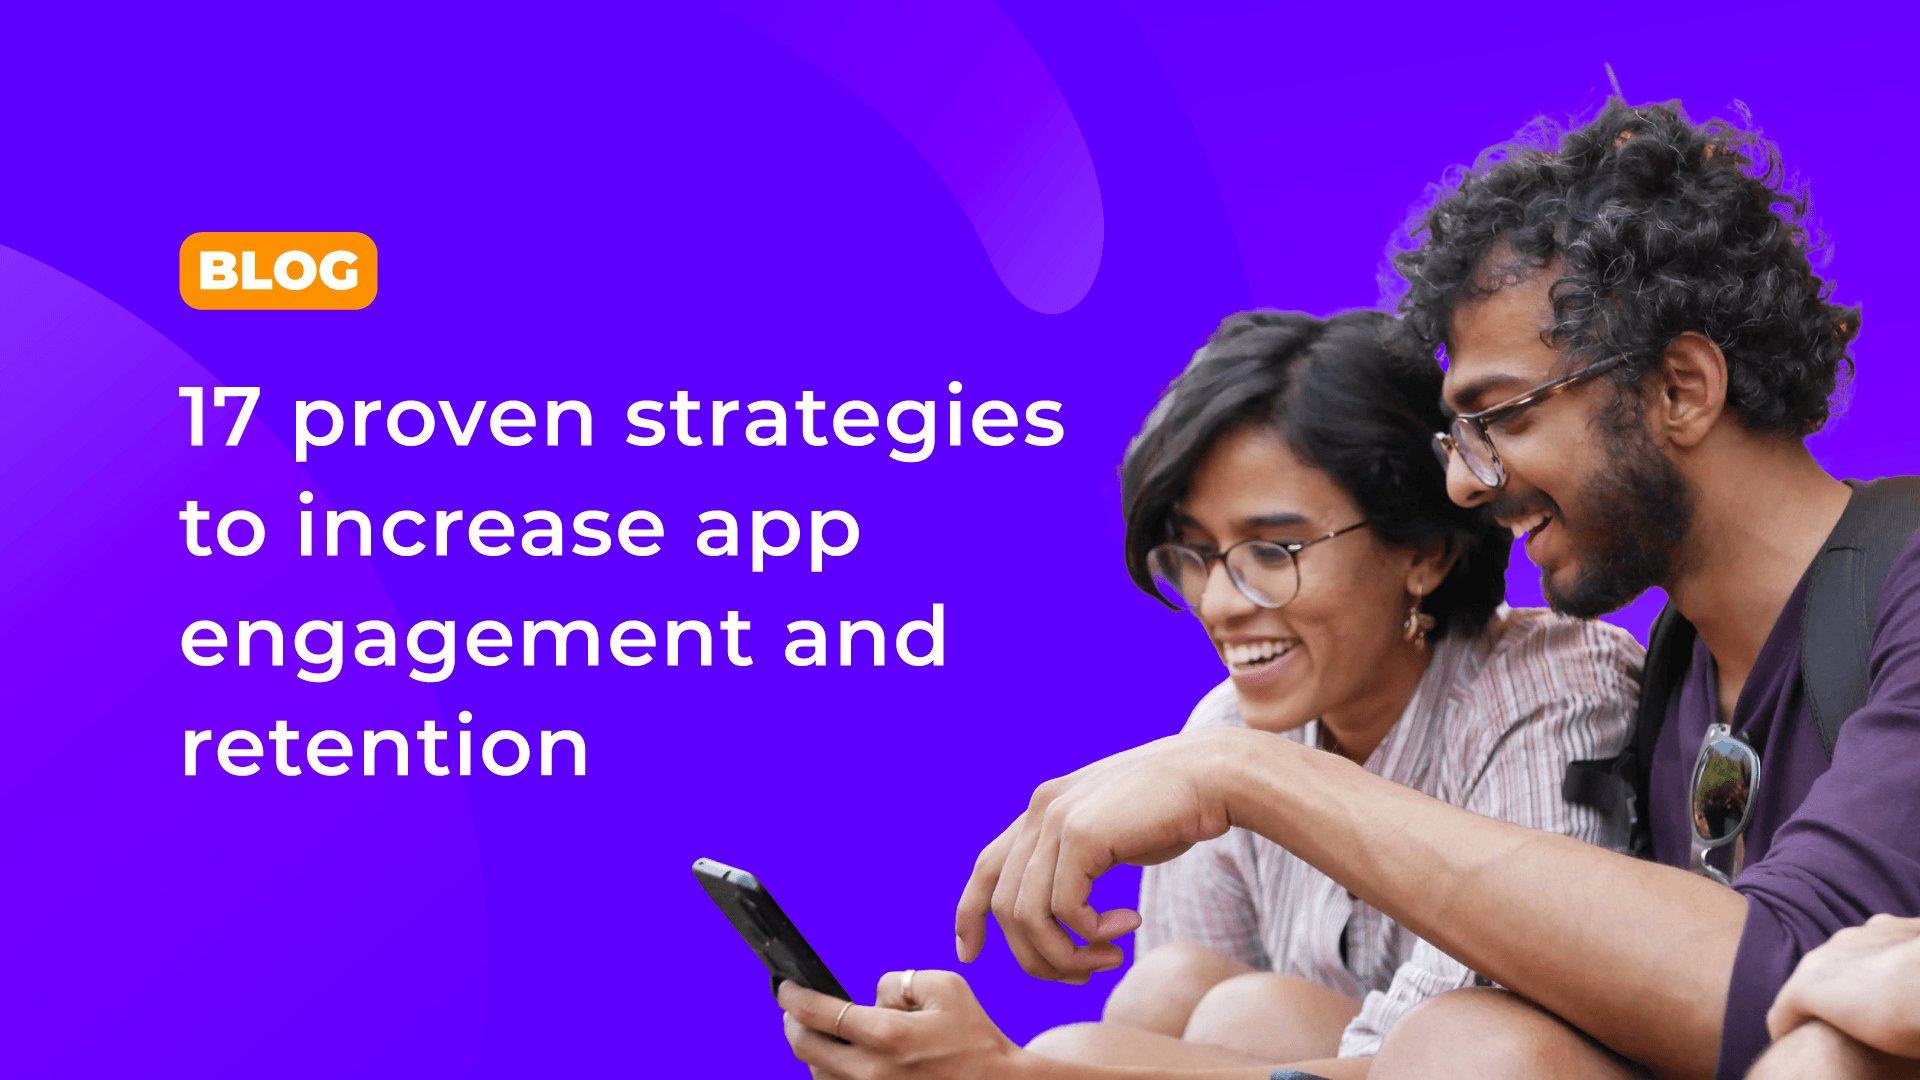 17 proven strategies to increase app engagement and retention